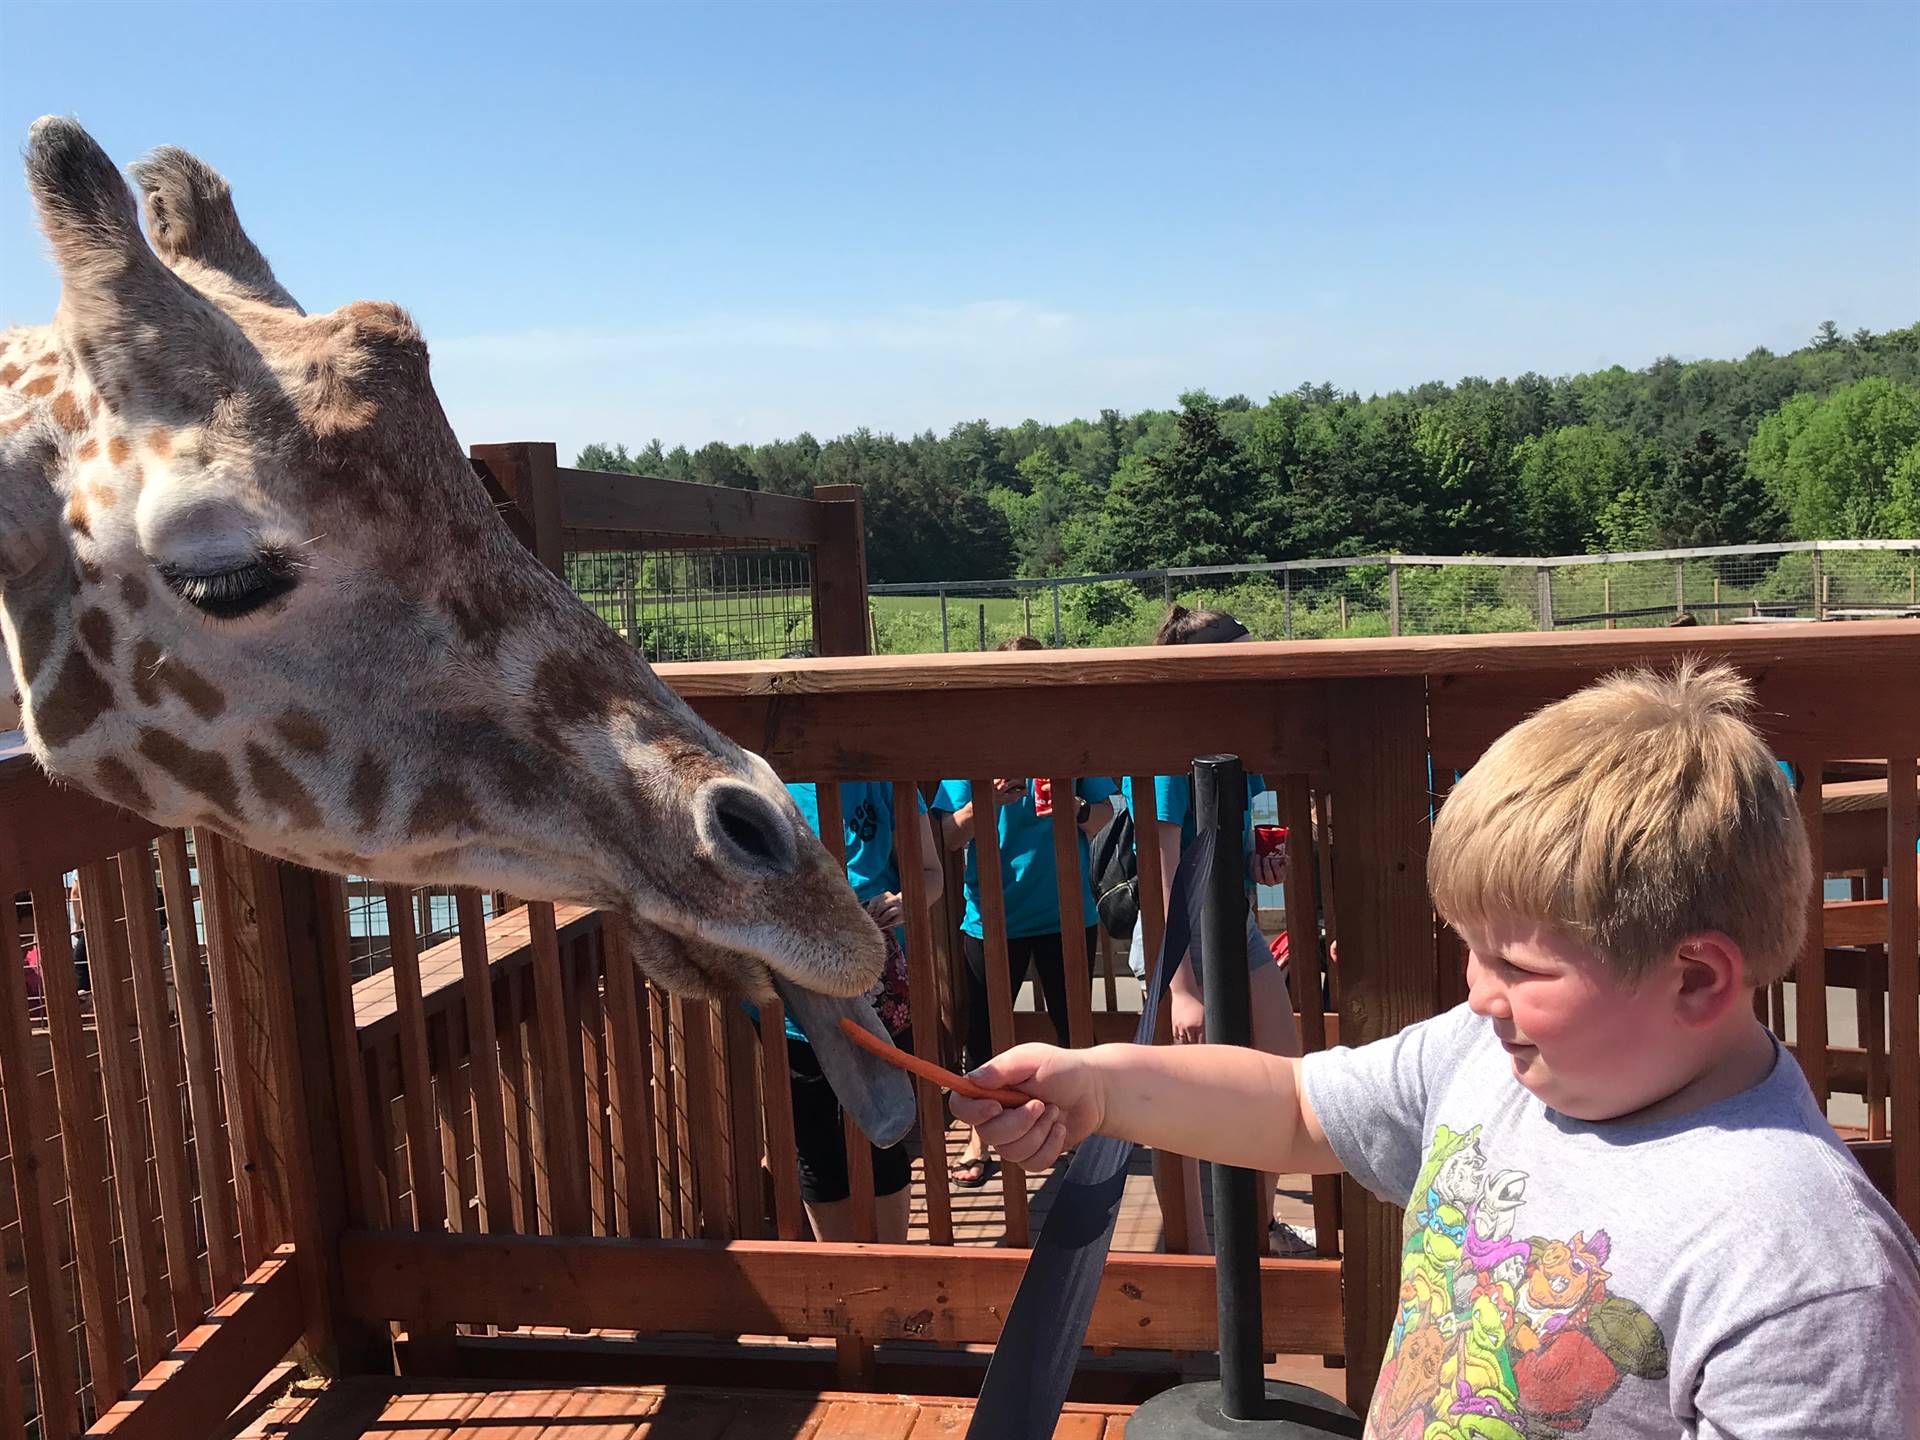 Students feed the giraffes a carrot nibble